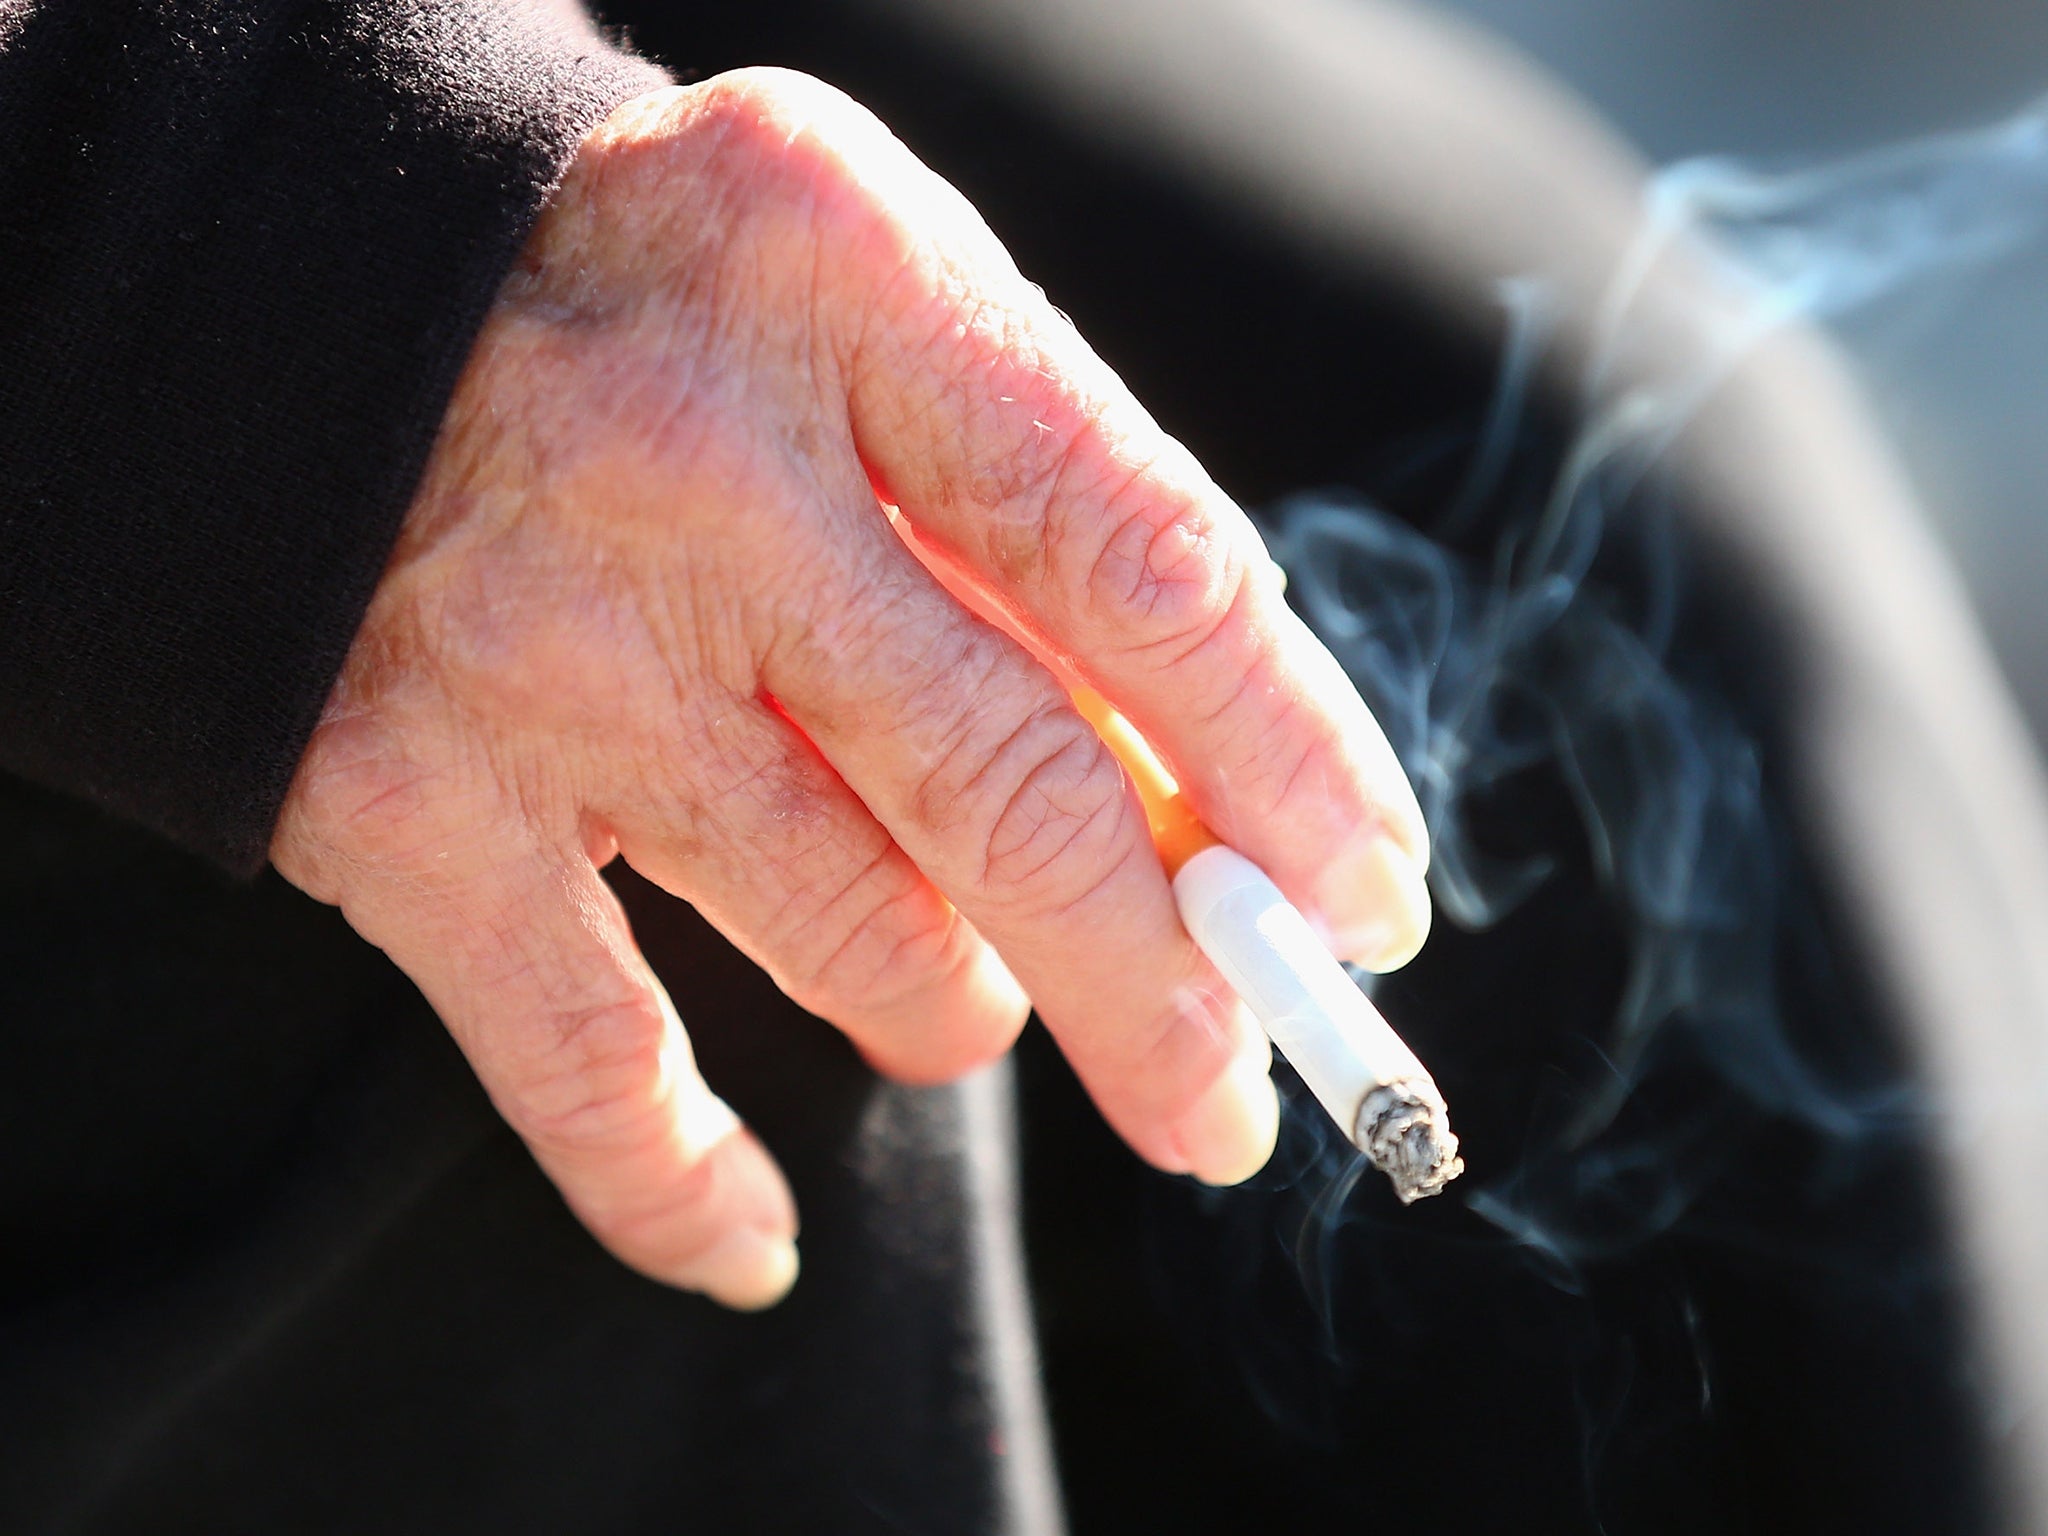 Nottinghamshire County Council has said around 9,000 of its employees will be barred from smoking during work time